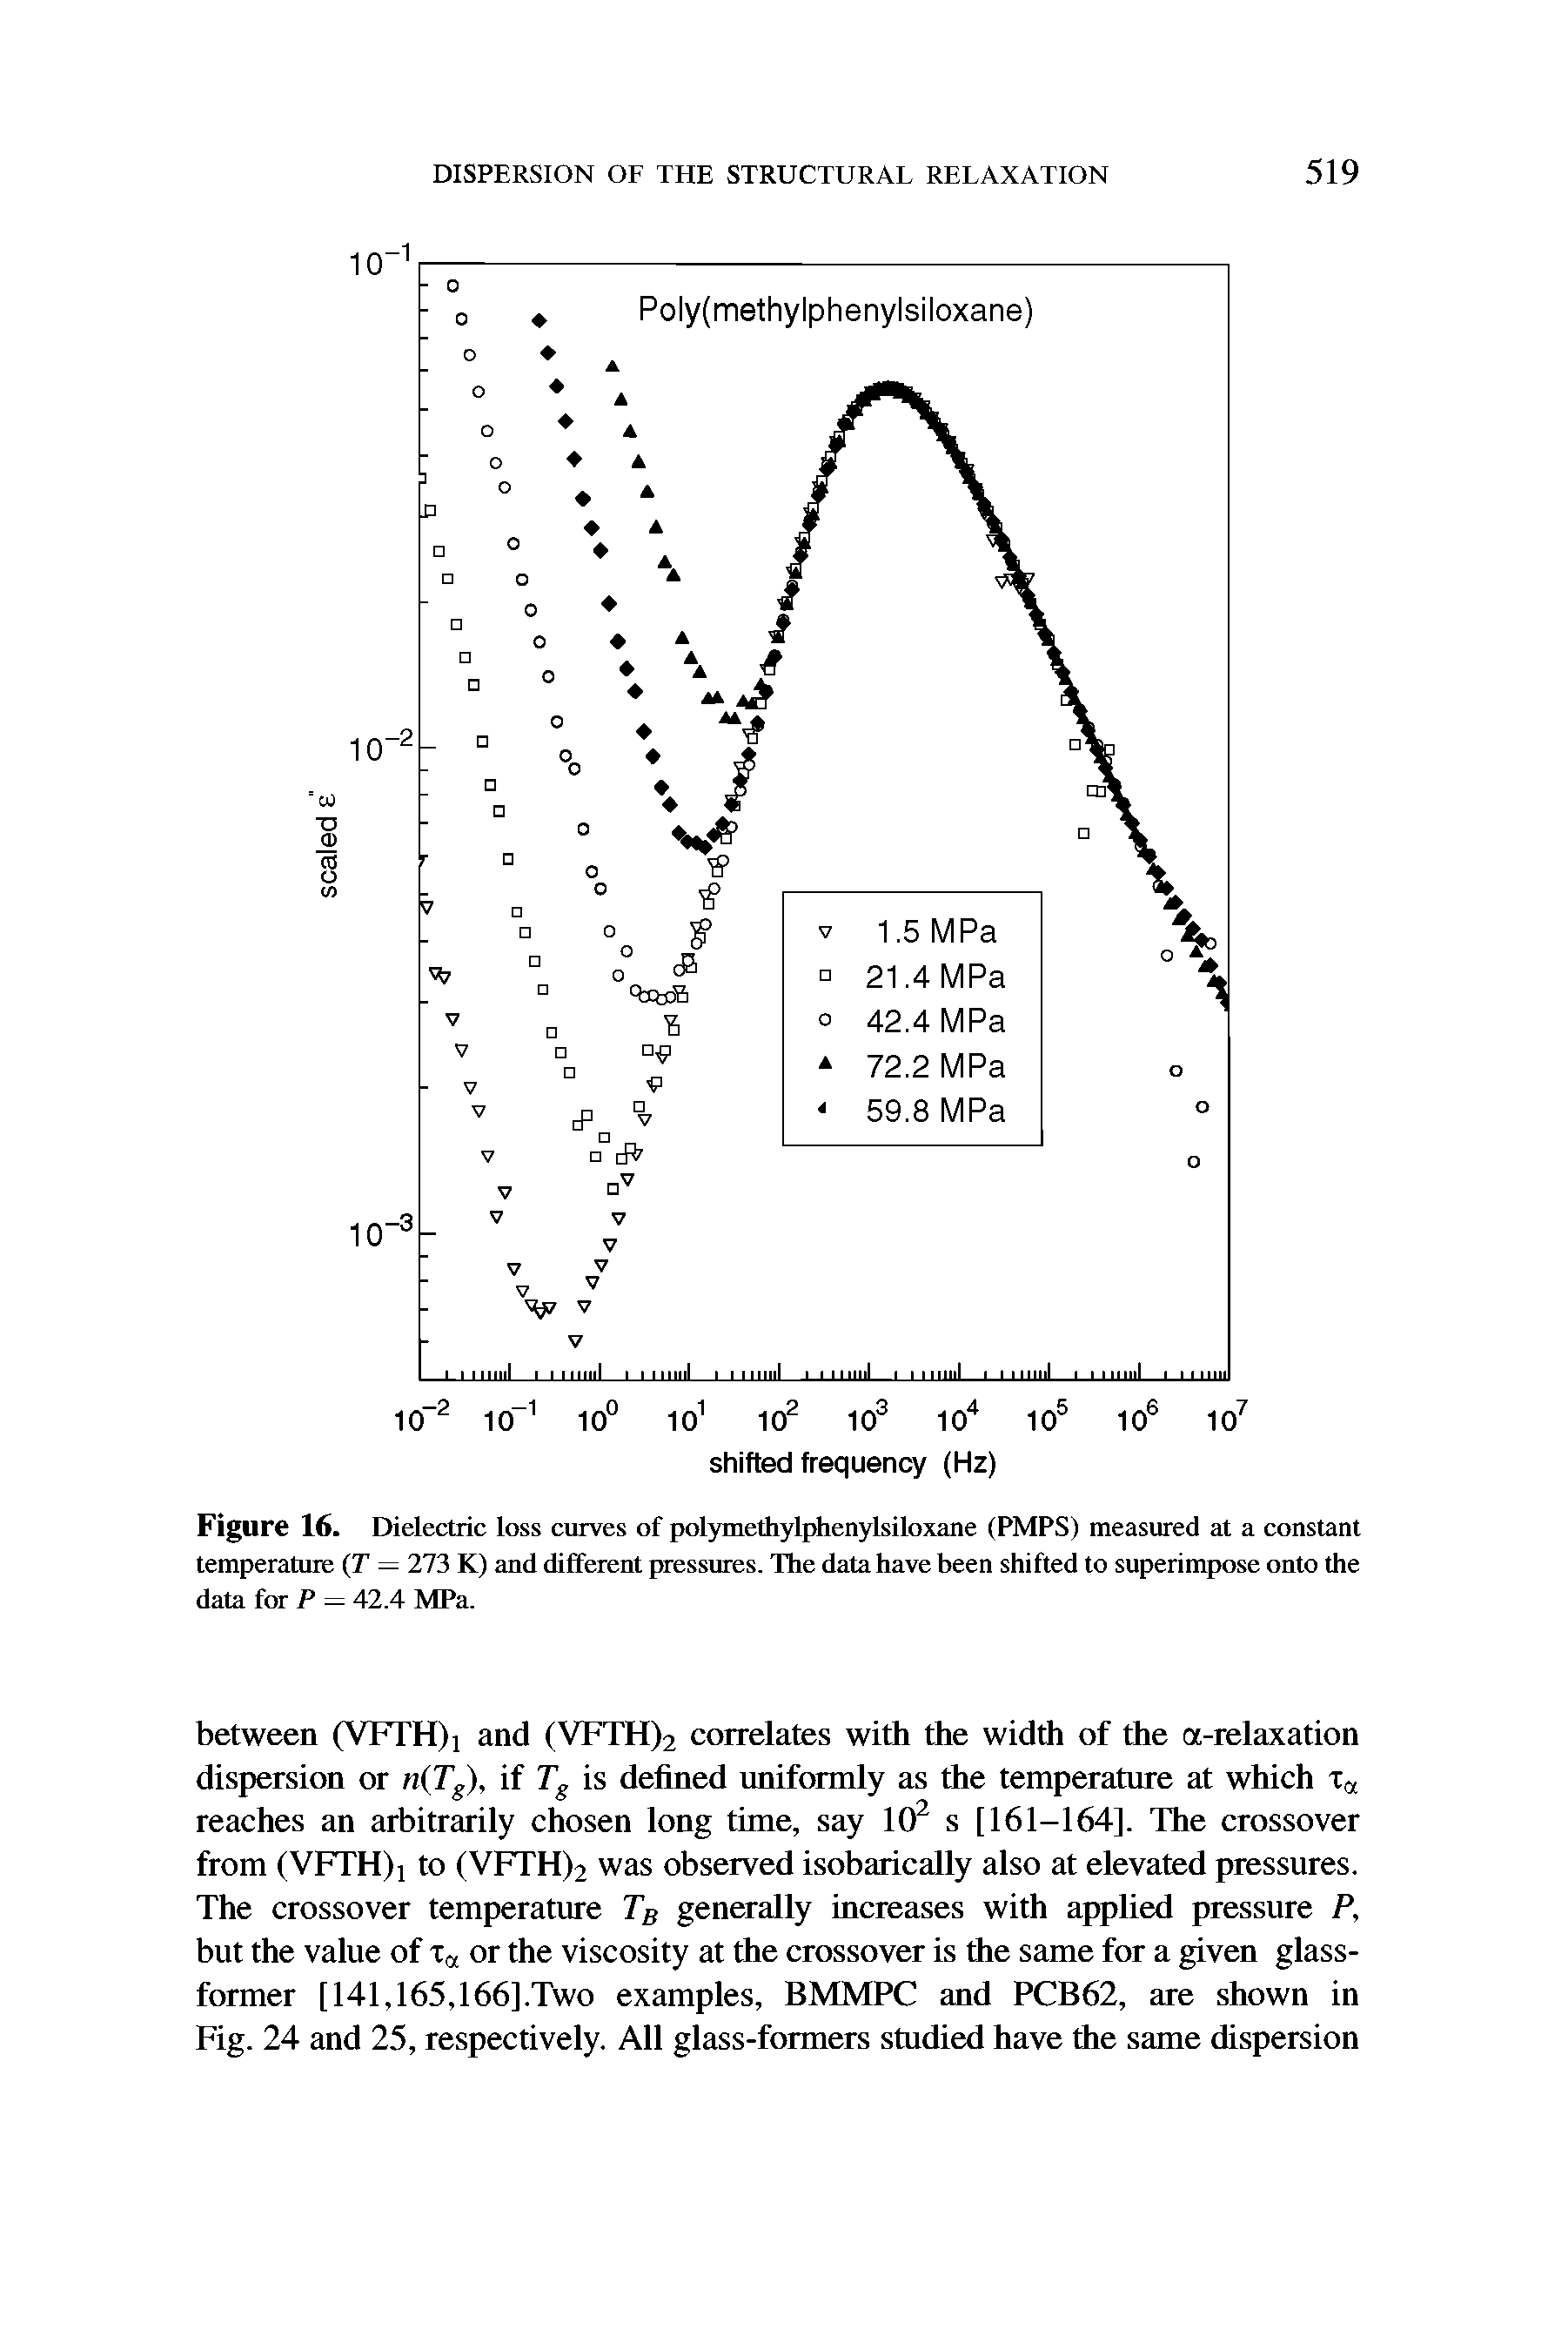 Figure 16. Dielectric loss curves of polymethylphenylsiloxane (PMPS) measured at a constant temperature (T — 273 K) and different pressures. The data have been shifted to superimpose onto the data for P — 42.4 MPa.